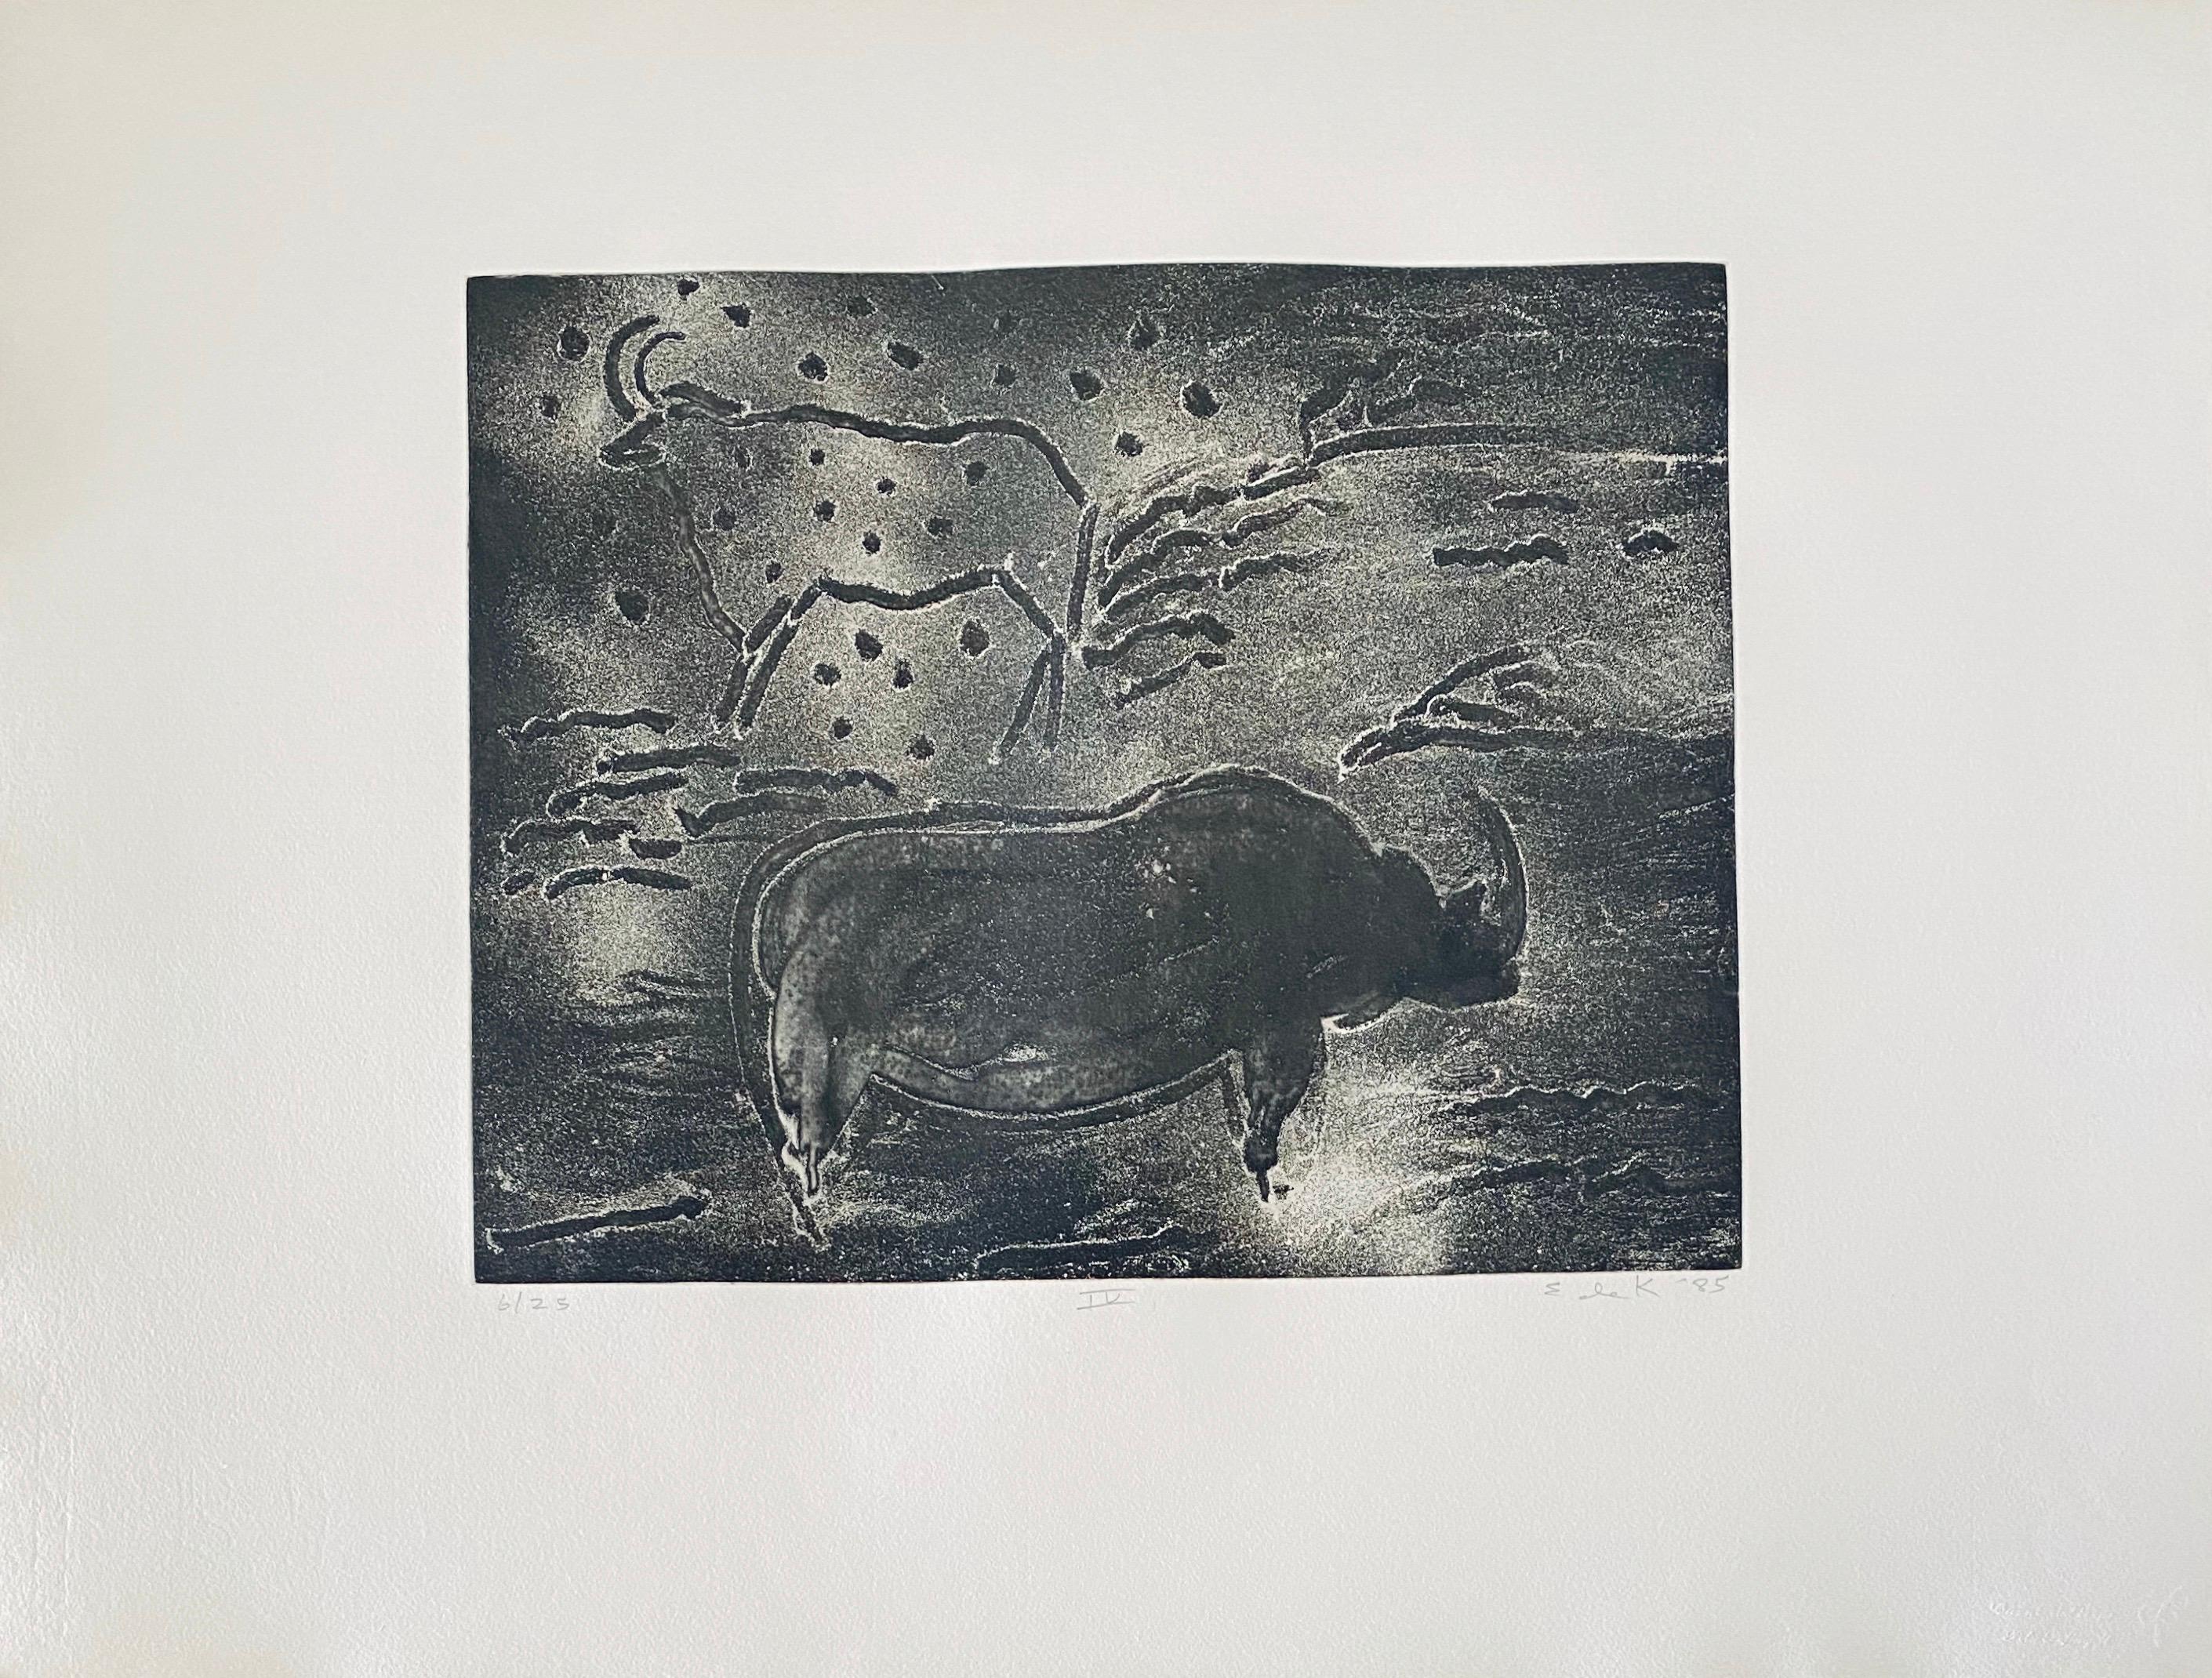 Abstract Expressionist Aquatint Etching Elaine de Kooning Animal Cave Drawing 3